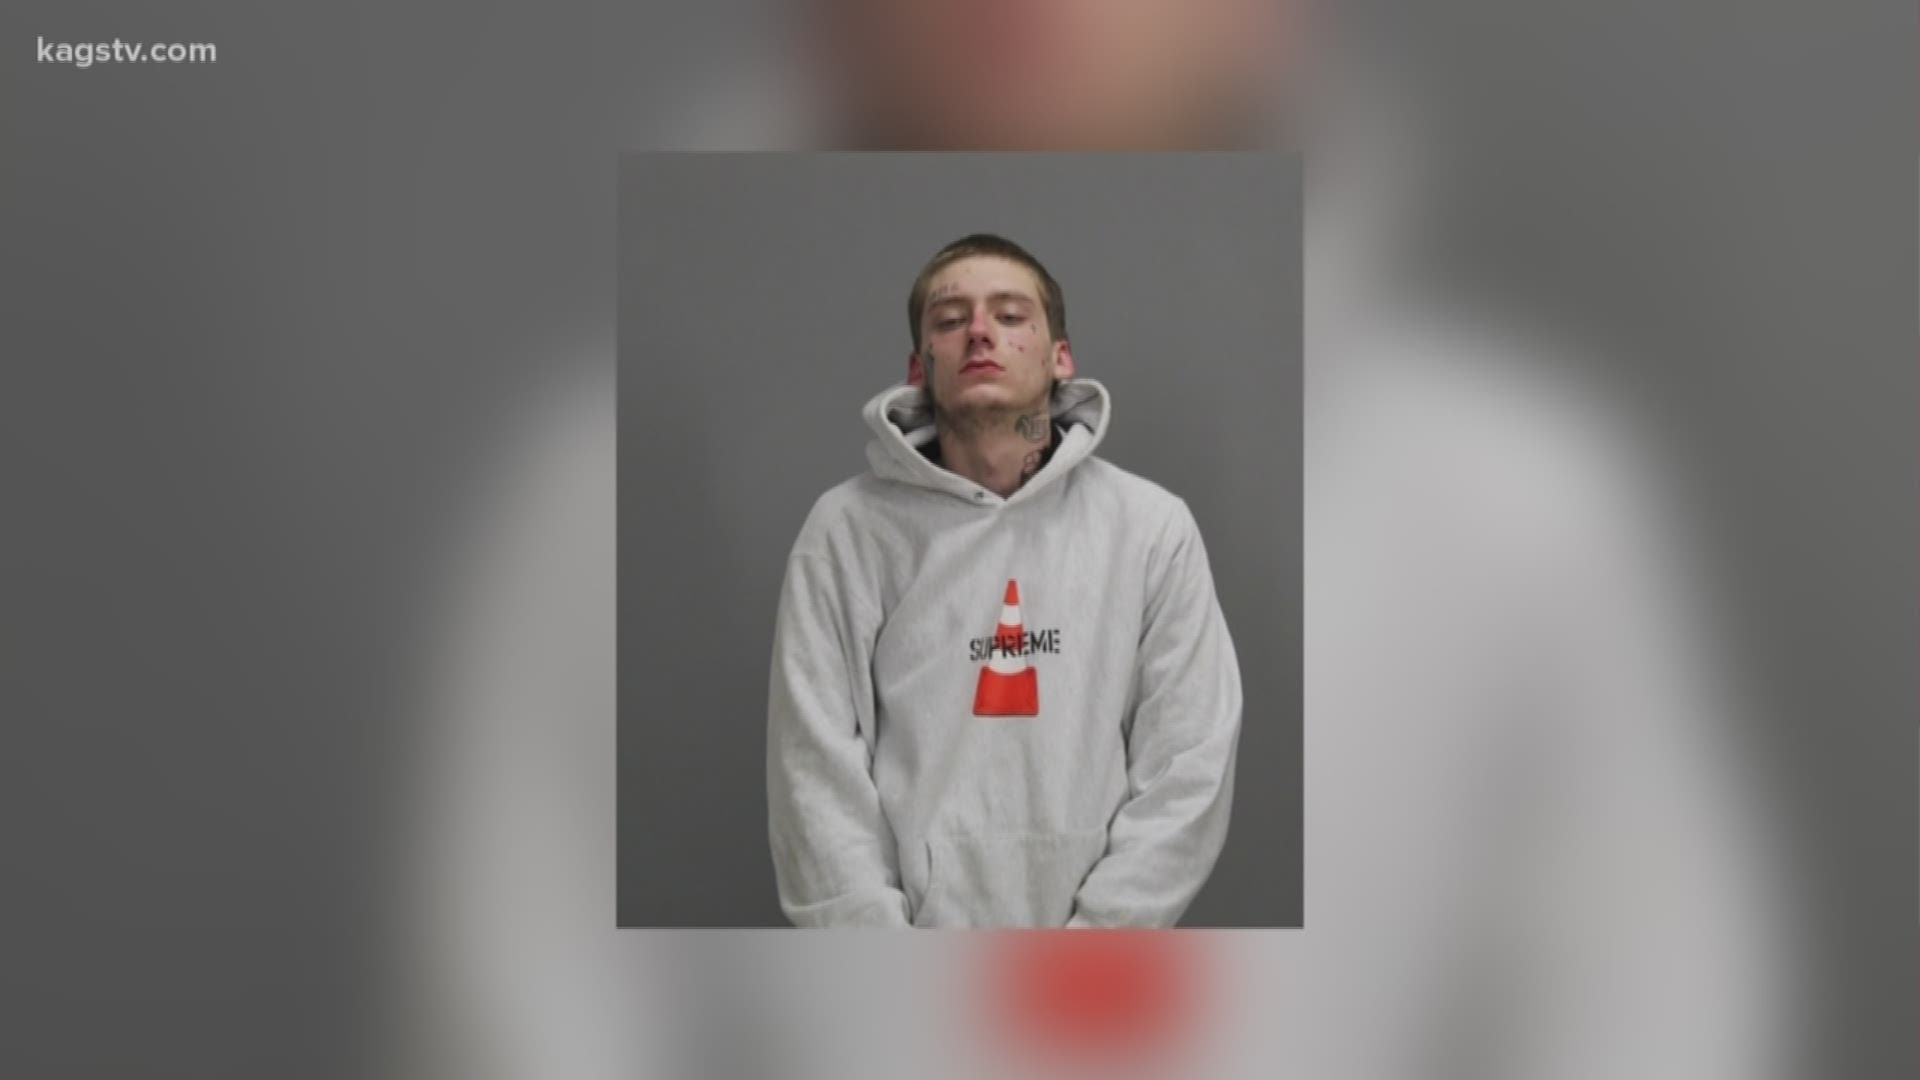 The 18-year old was originally caught because he was bragging about a robbery he committed on Snapchat.